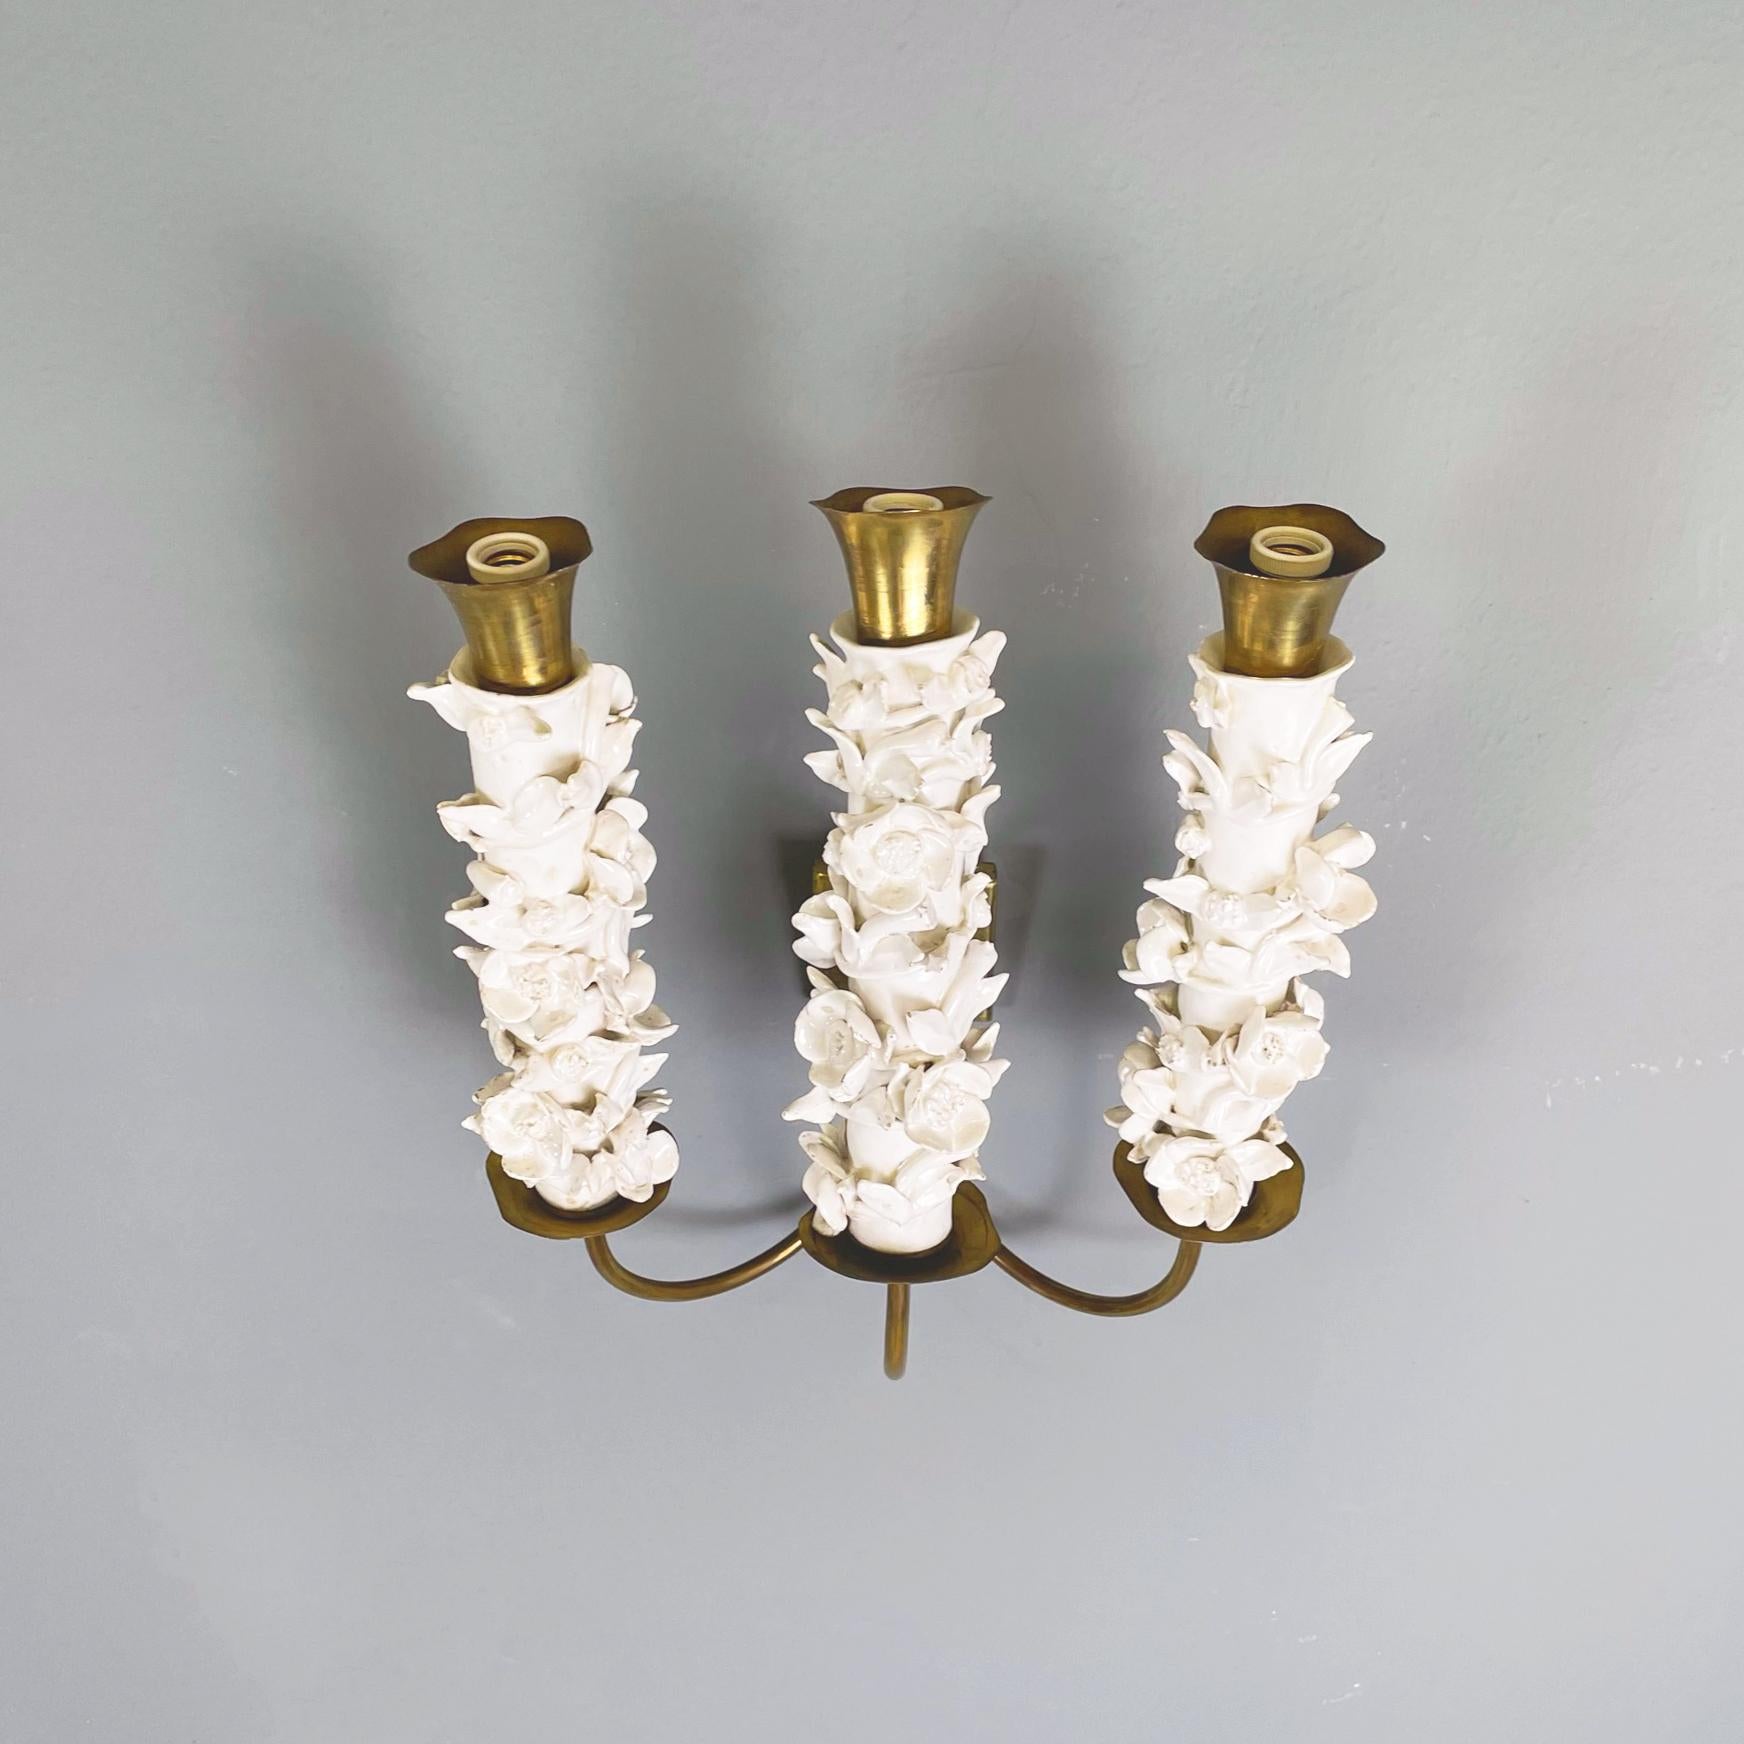 Mid-20th Century Italian Midcentury Brass White Floral Ceramic Wall Lamps by Luigi Zortea, 1949 For Sale